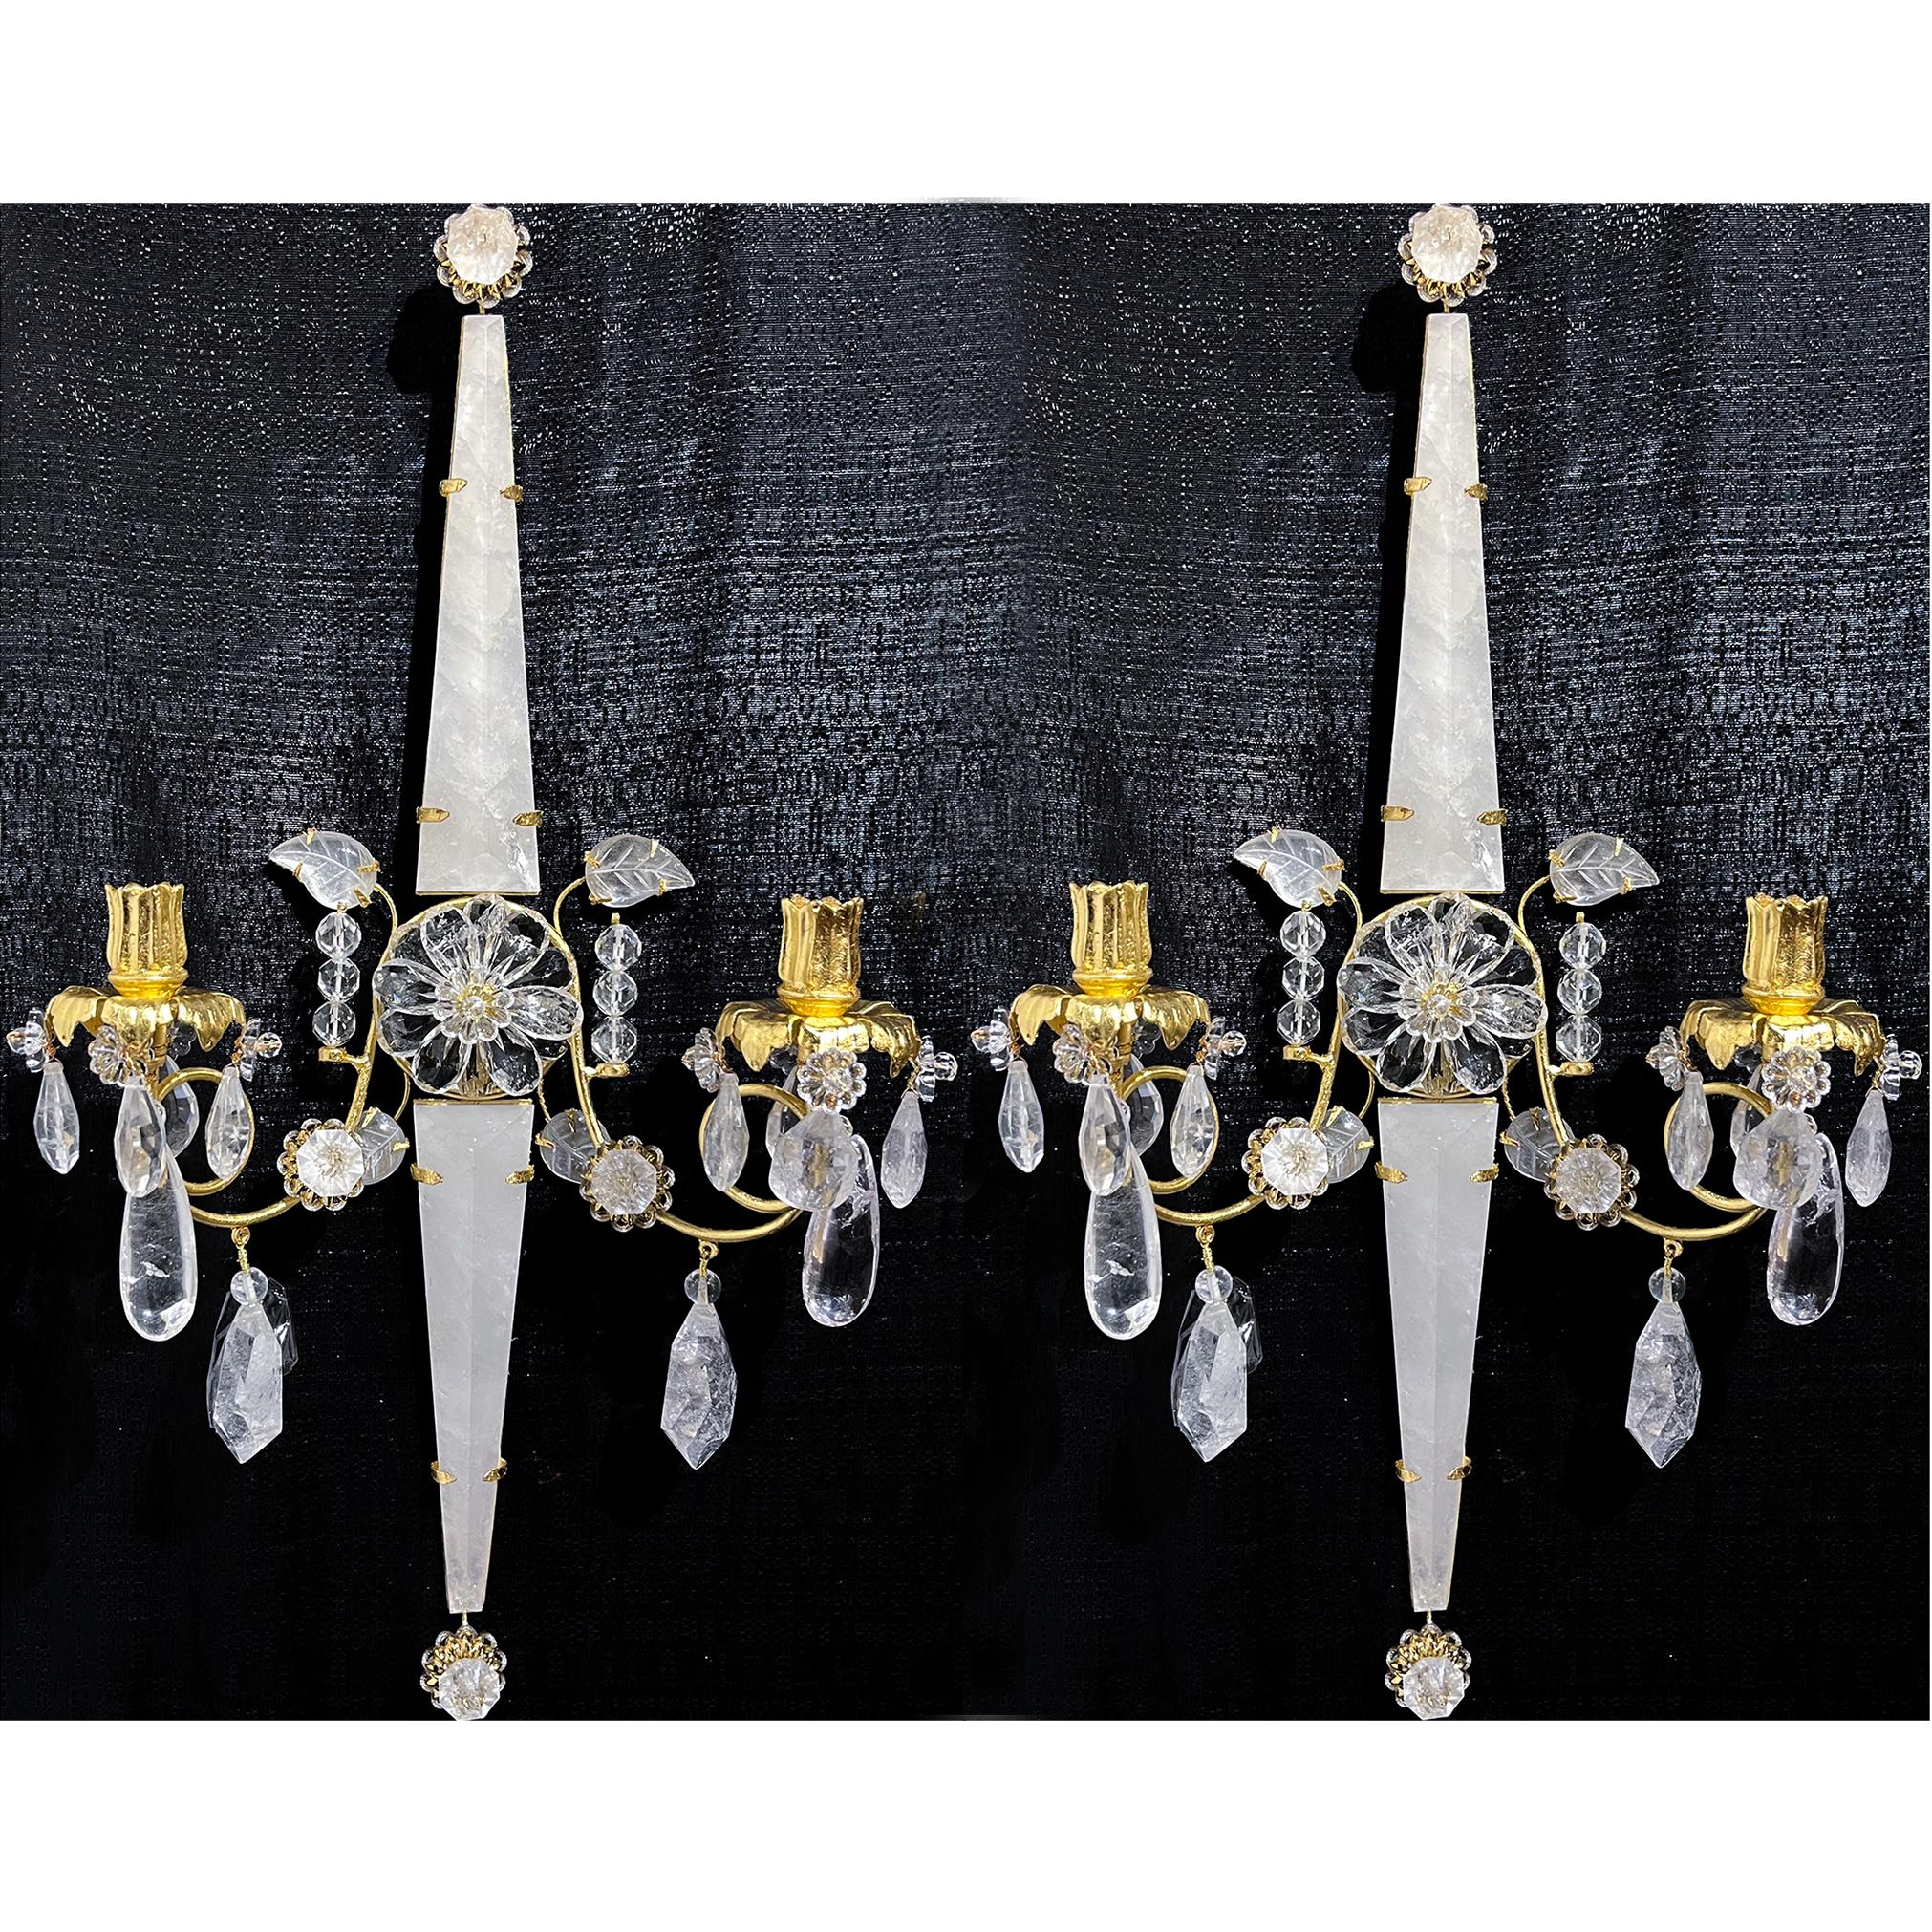 Pair of rock crystal two light sconces with large Triangle cut crystal pieces, in a star shape with floral center piece and a carved leaves. Two gilt bronze branches outstretch from the center flower, holding two gilt bronze flowers which will carry